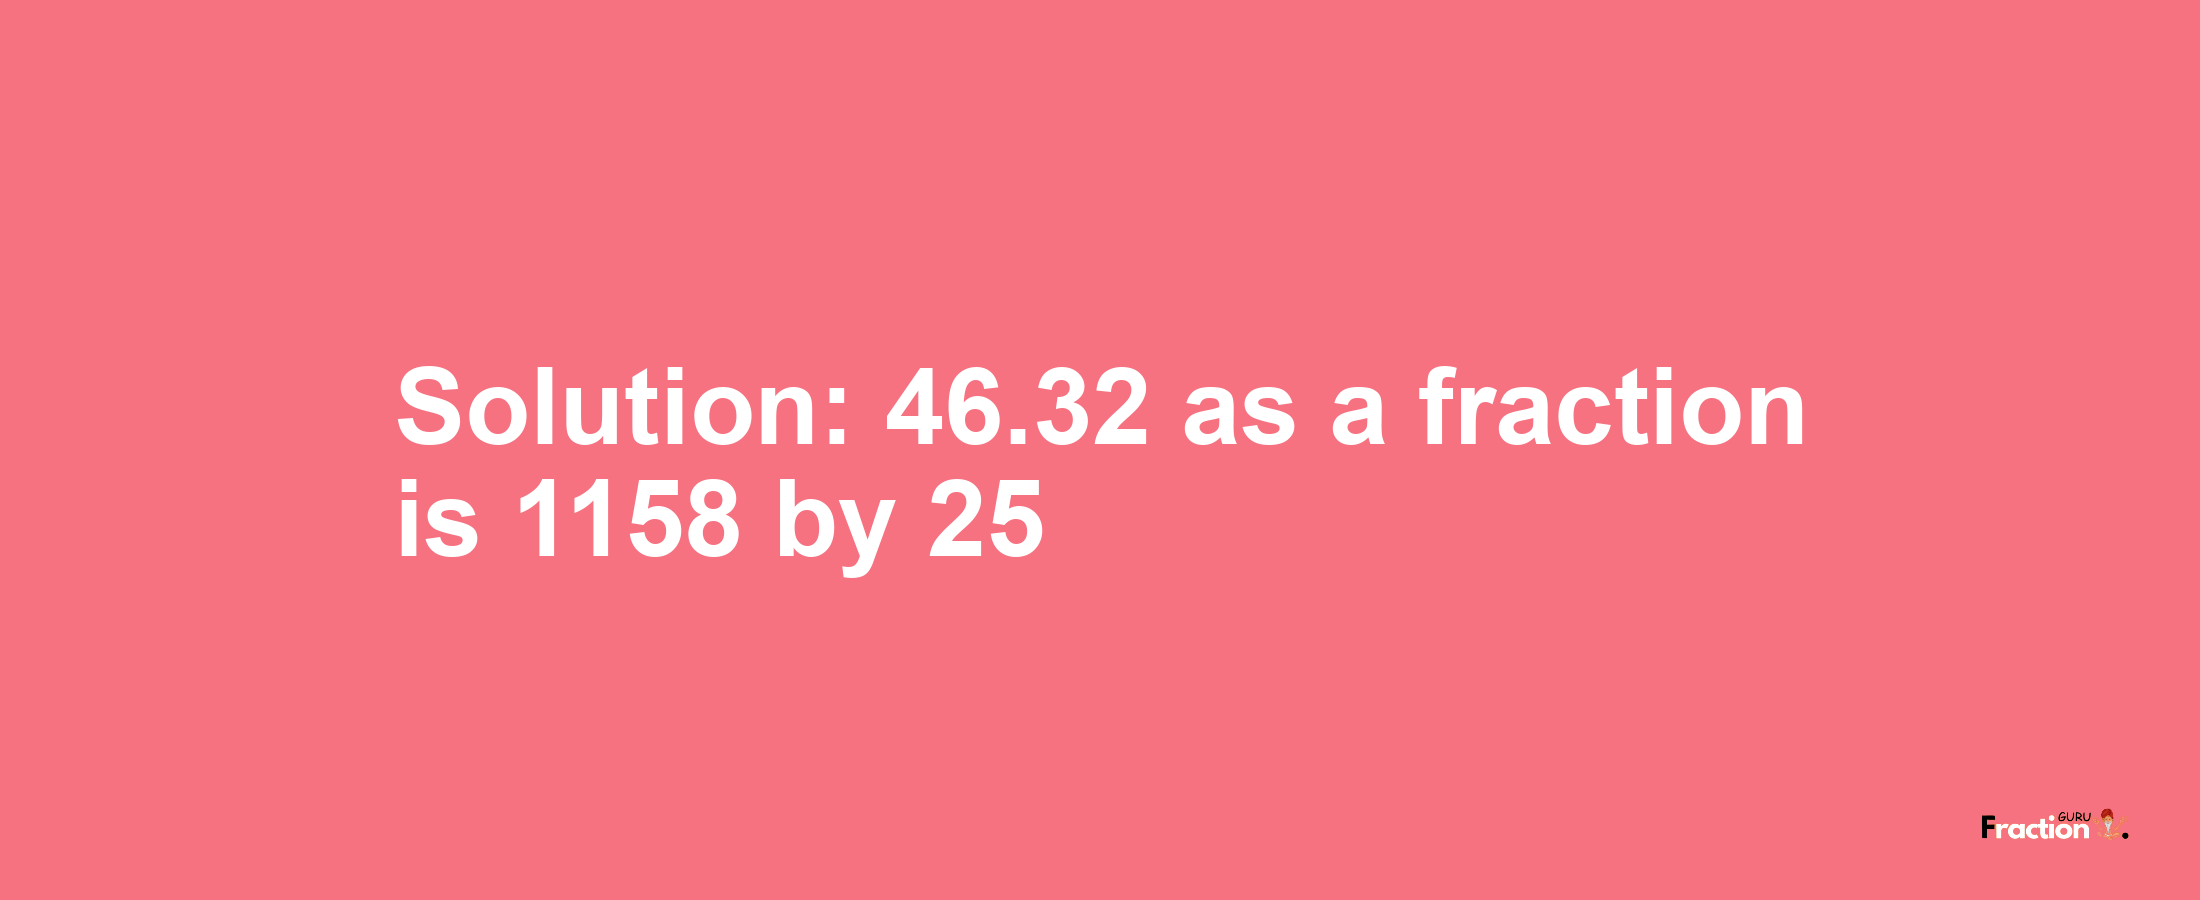 Solution:46.32 as a fraction is 1158/25